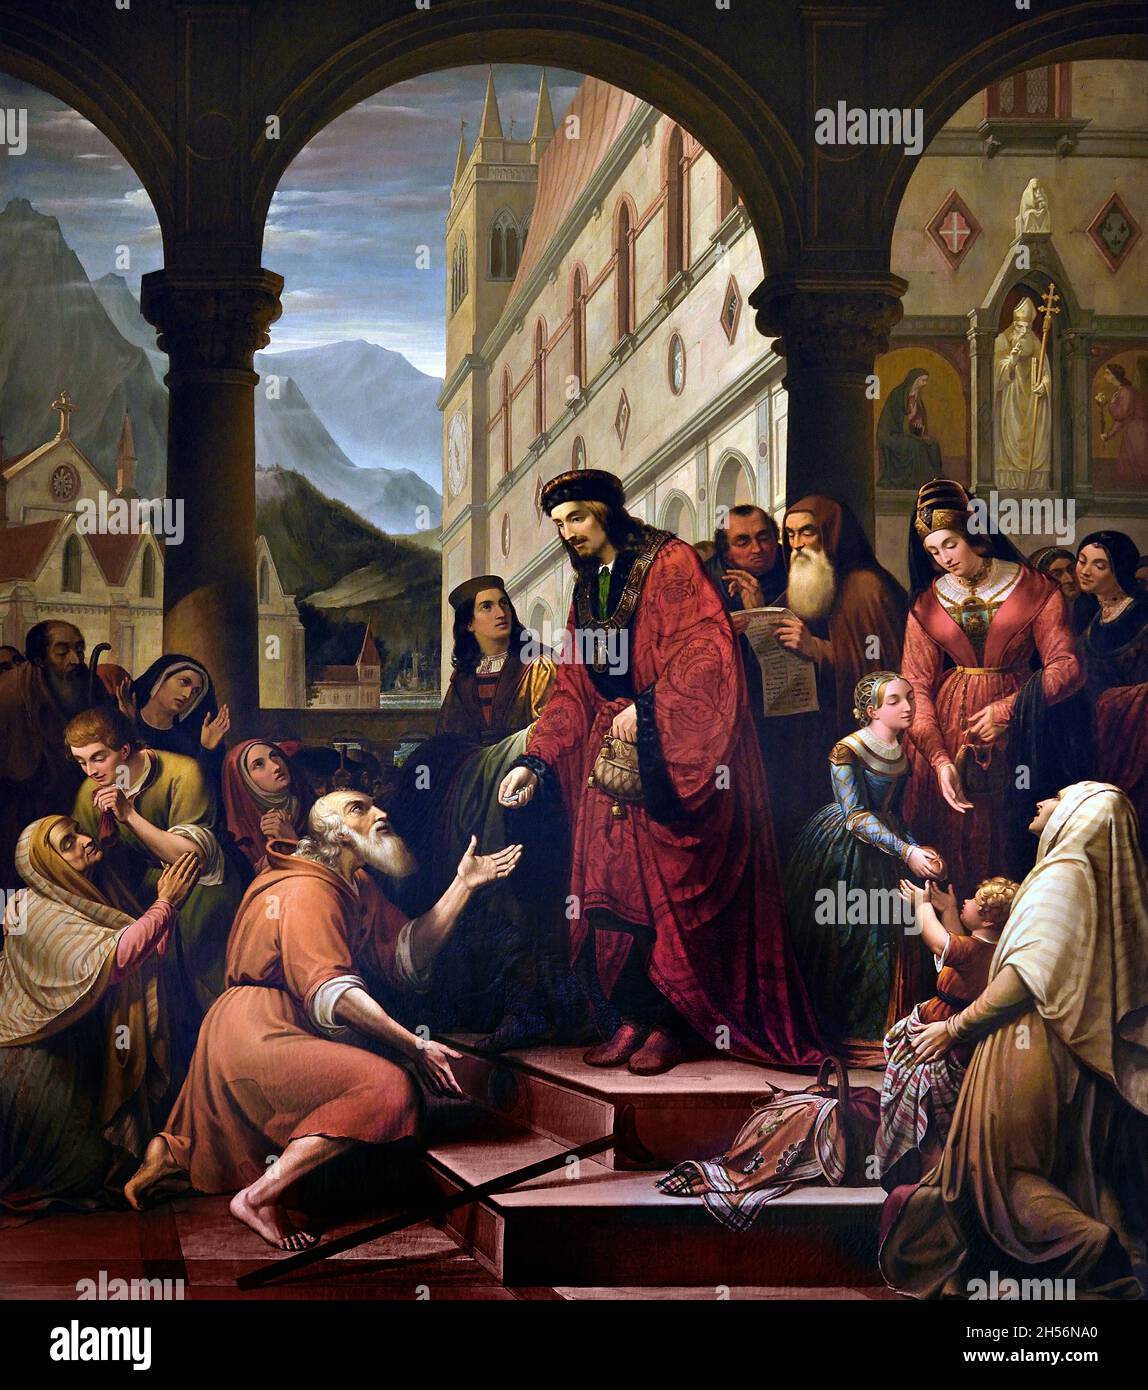 Beato Amedeo di Savoia gives alms to the poor 1842  by Pucci Camillo (second quarter 19th century) Torino Palazzo Reale - Turin Royal Palace, Italian, Italy, Amadeus IX , 1435 –  1472 ,nicknamed the Happy, was the Duke of Savoy from 1465 to 1472 Stock Photo